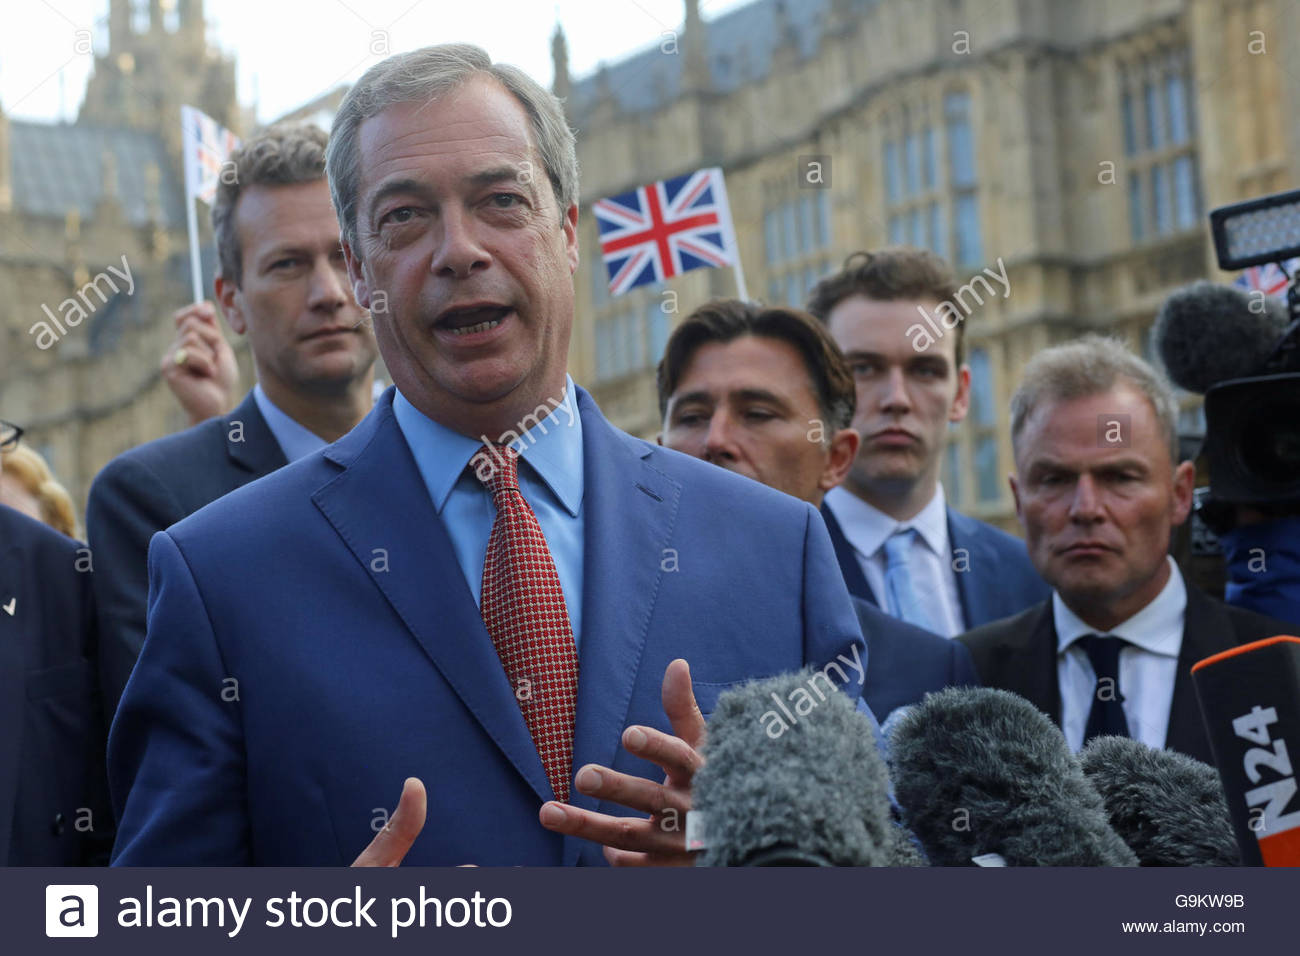 Nigel Farage speaks at Westminster on the morning of the Brexit result. Credit: reallifephotos/Alamy Stock Photo